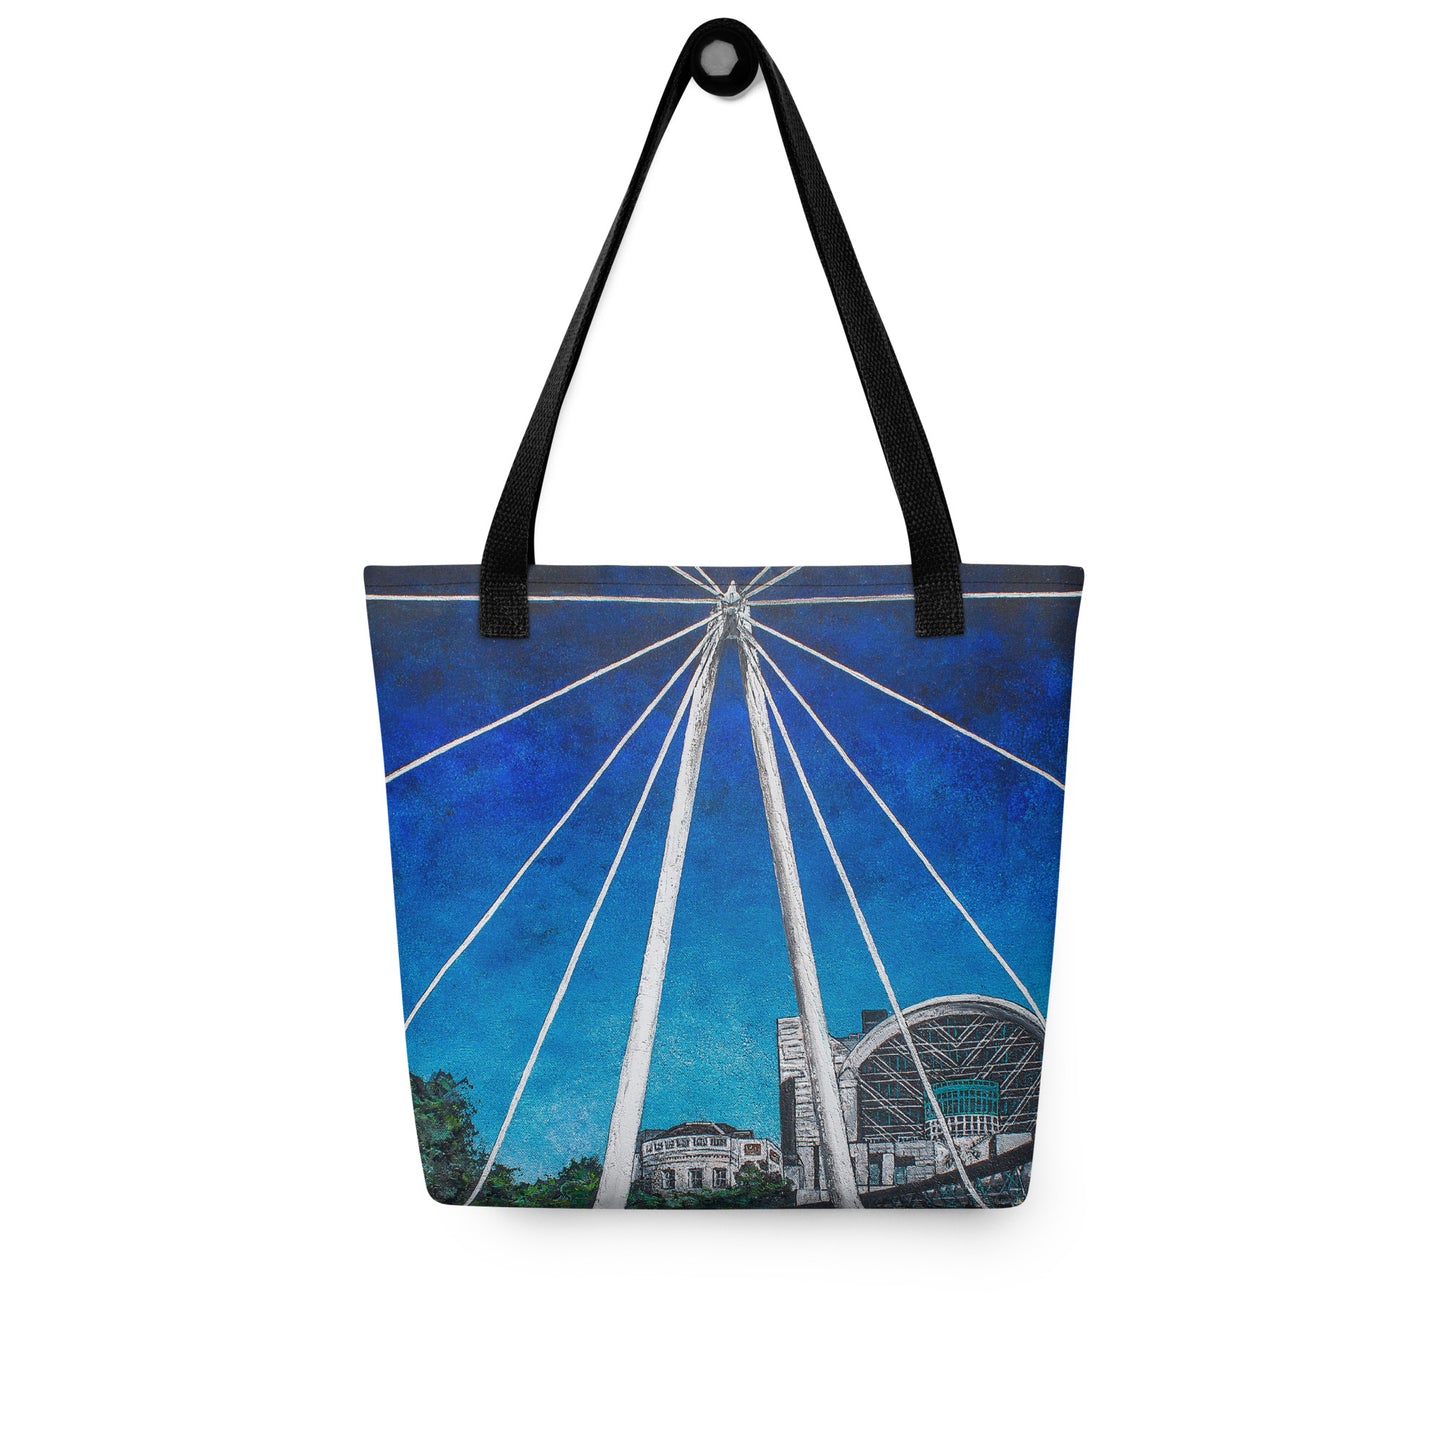 Commute to Work Tote Bag (Charing Cross, London)